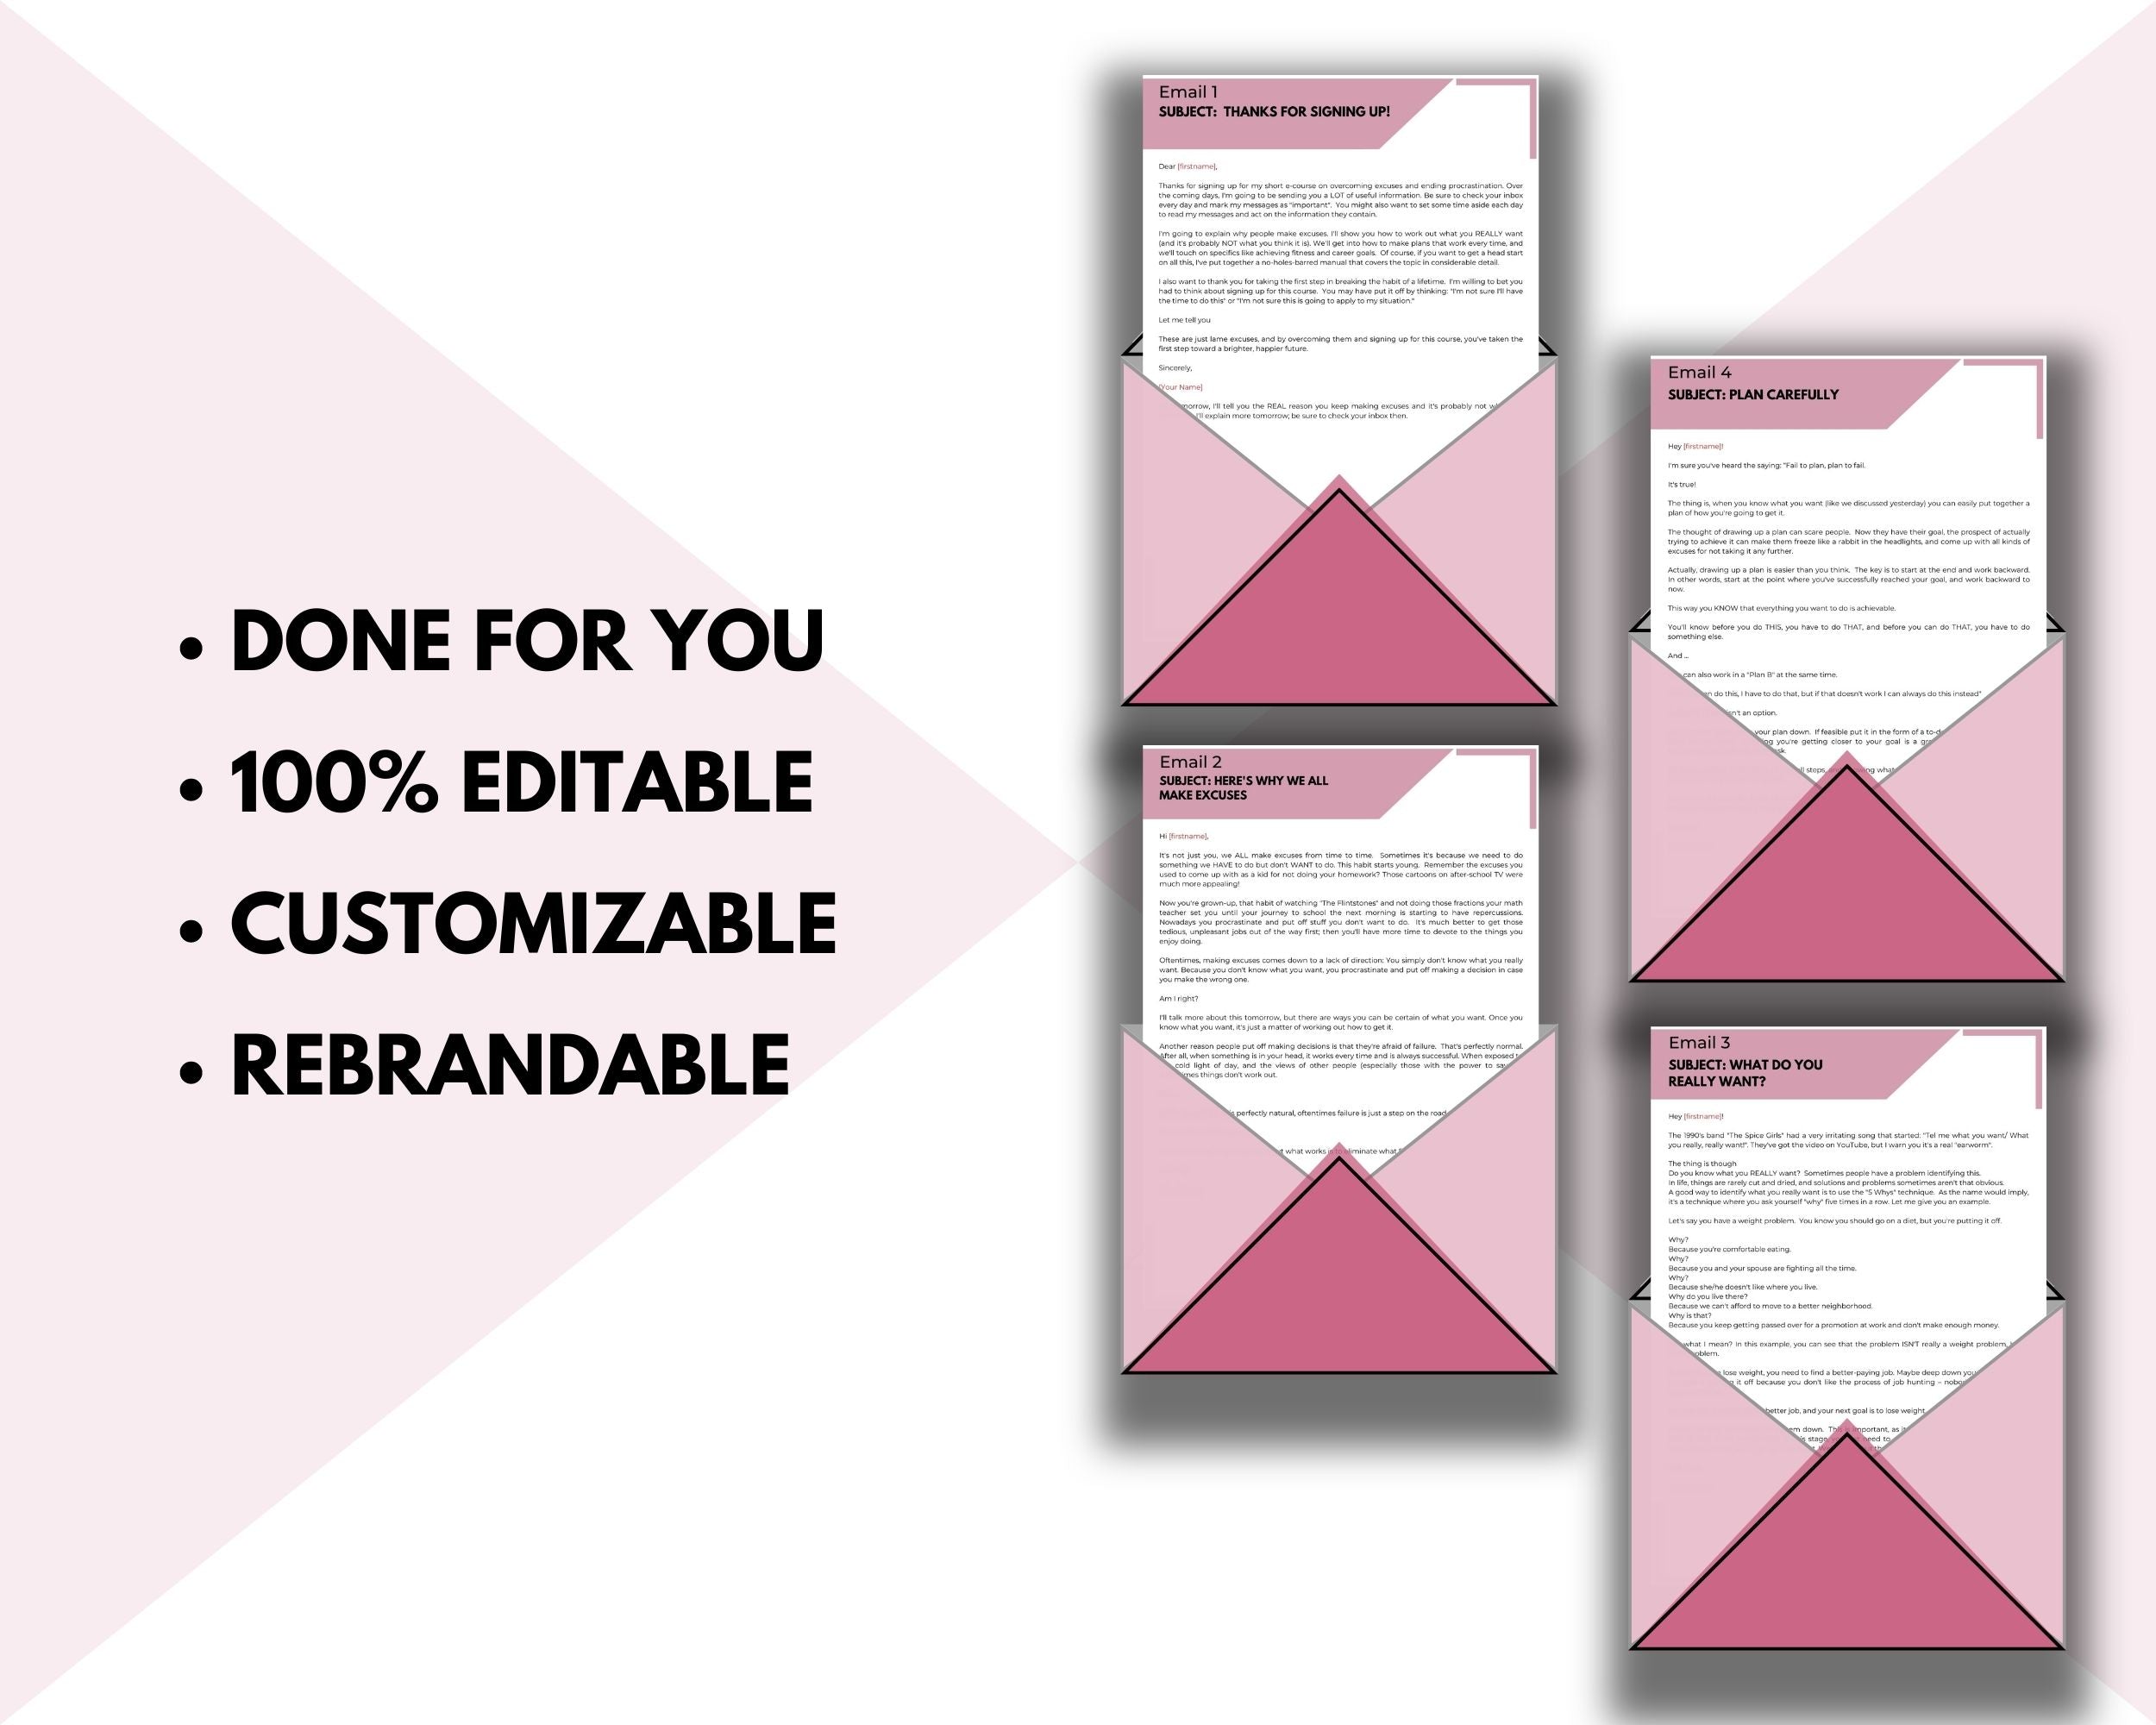 No More Excuses 7 Emails | Done-for-You eCourse | Rebrandable Newsletter Template